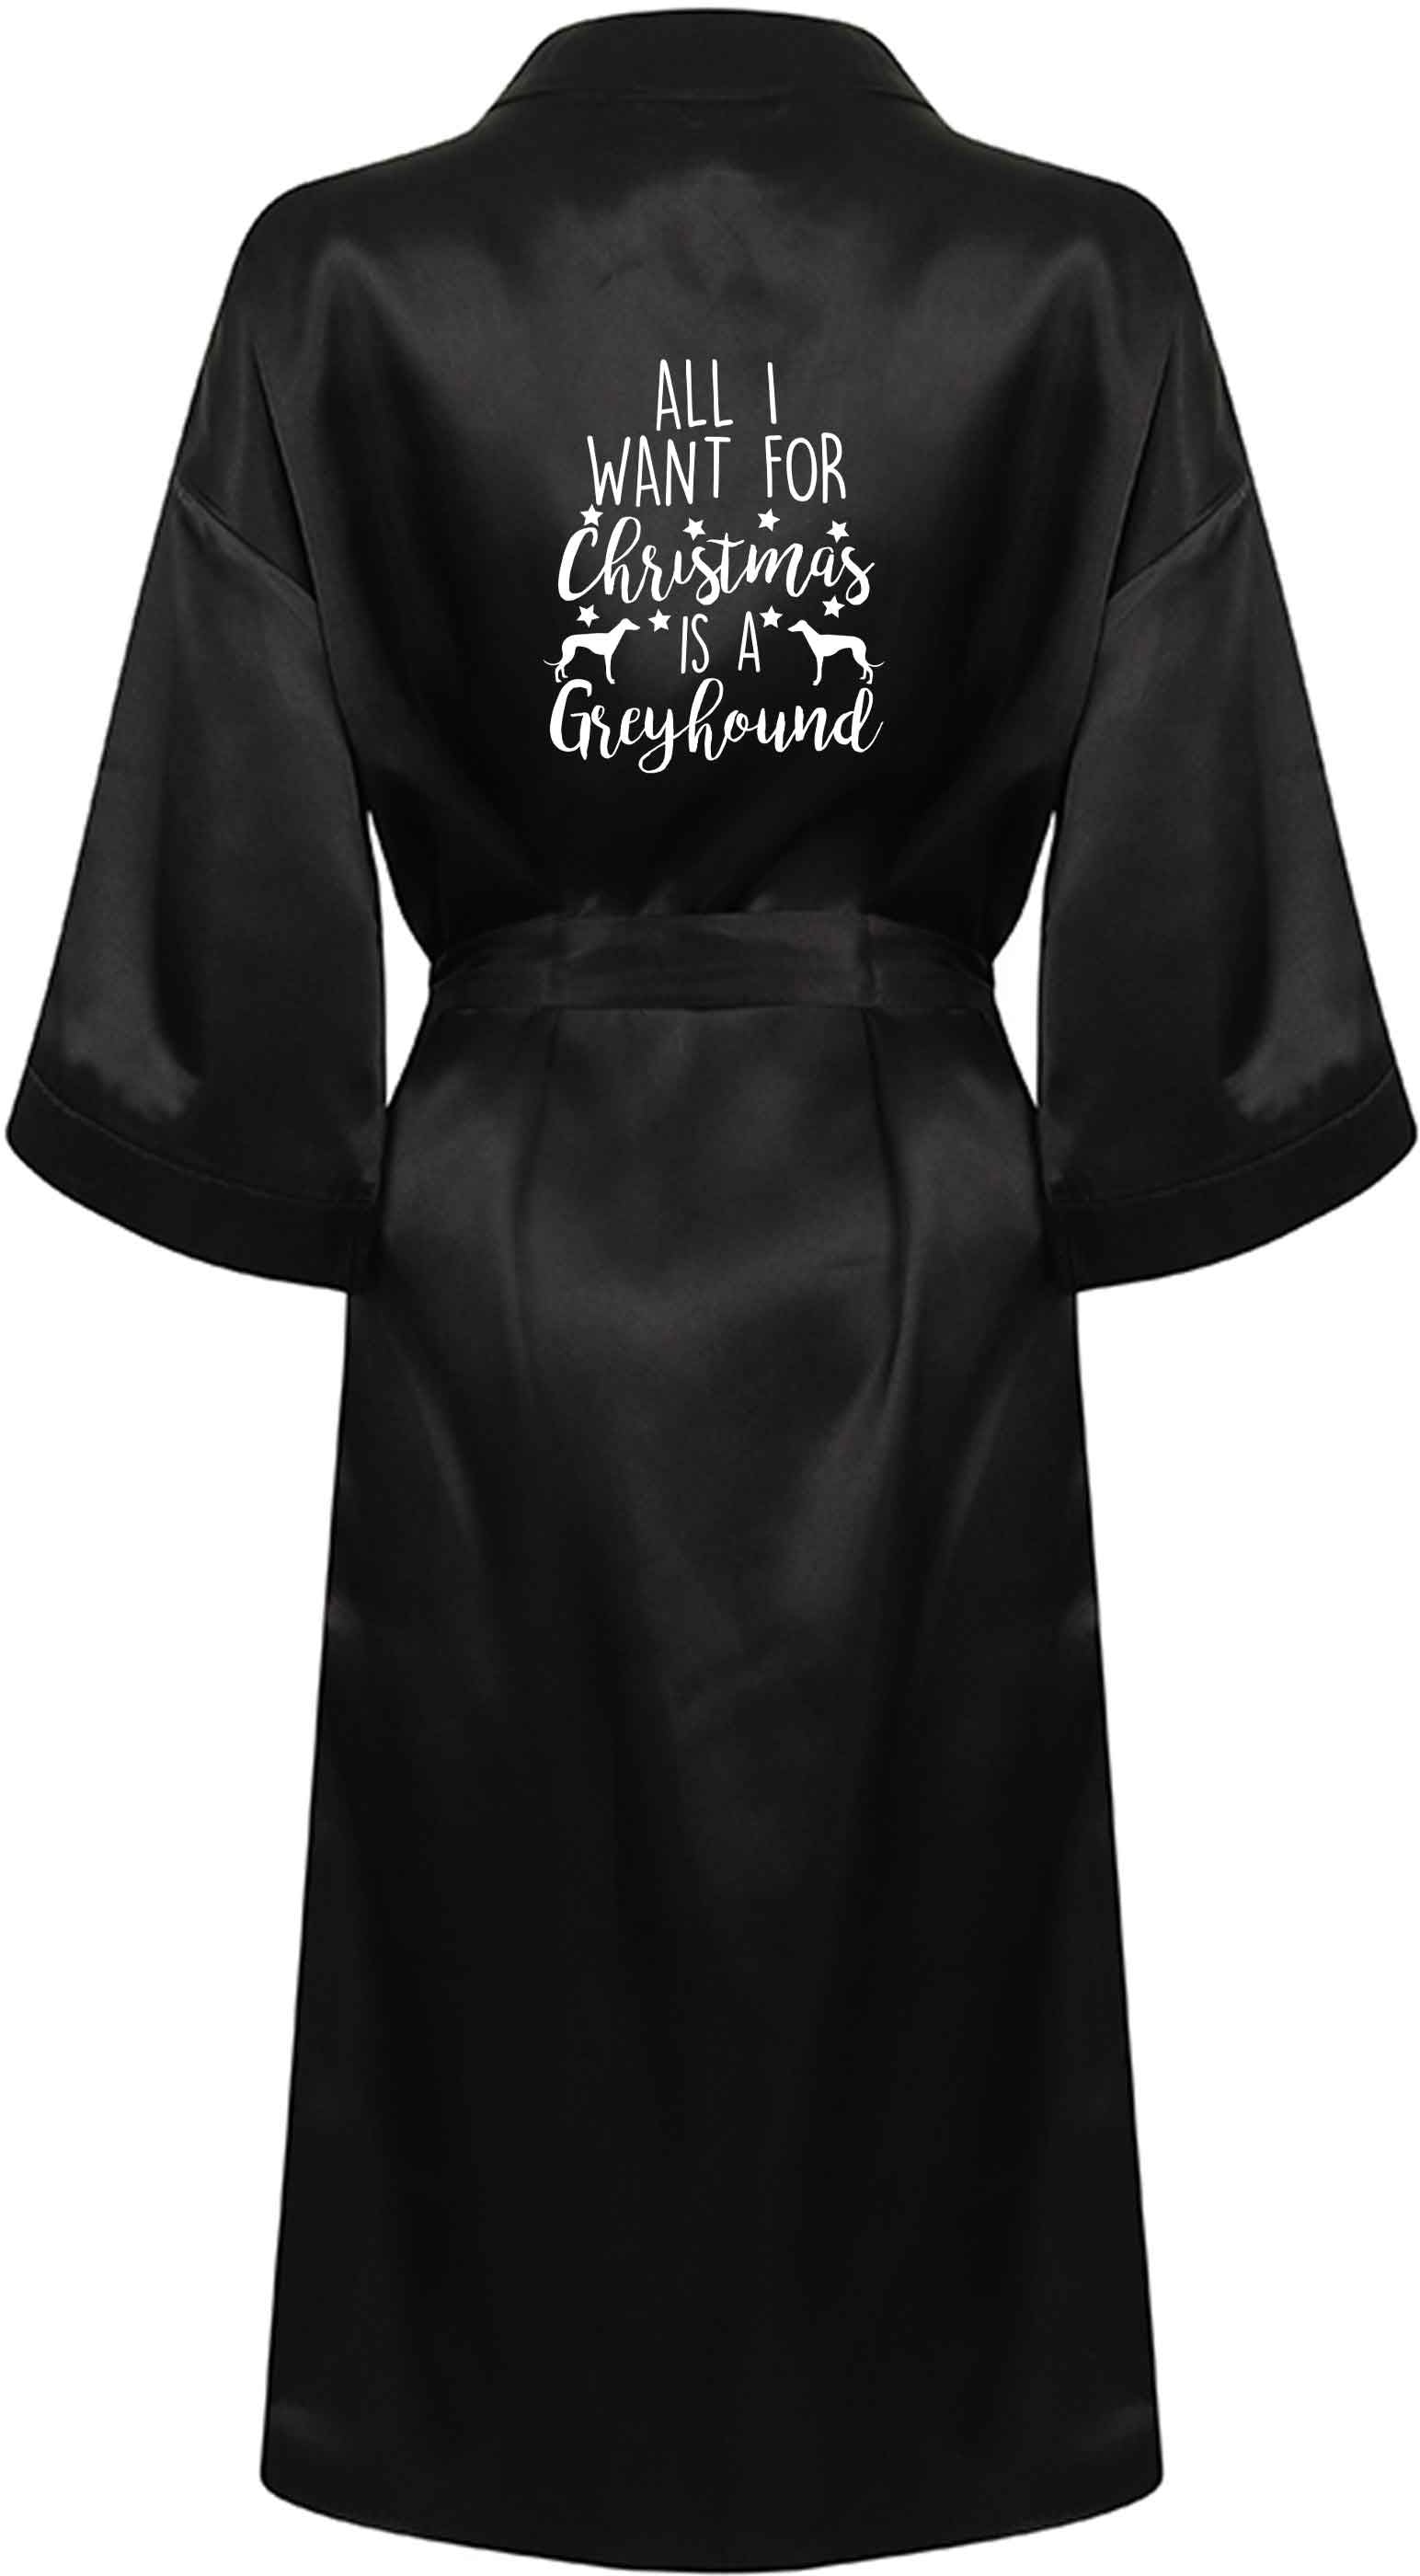 All I want for Christmas is a greyhound XL/XXL black ladies dressing gown size 16/18